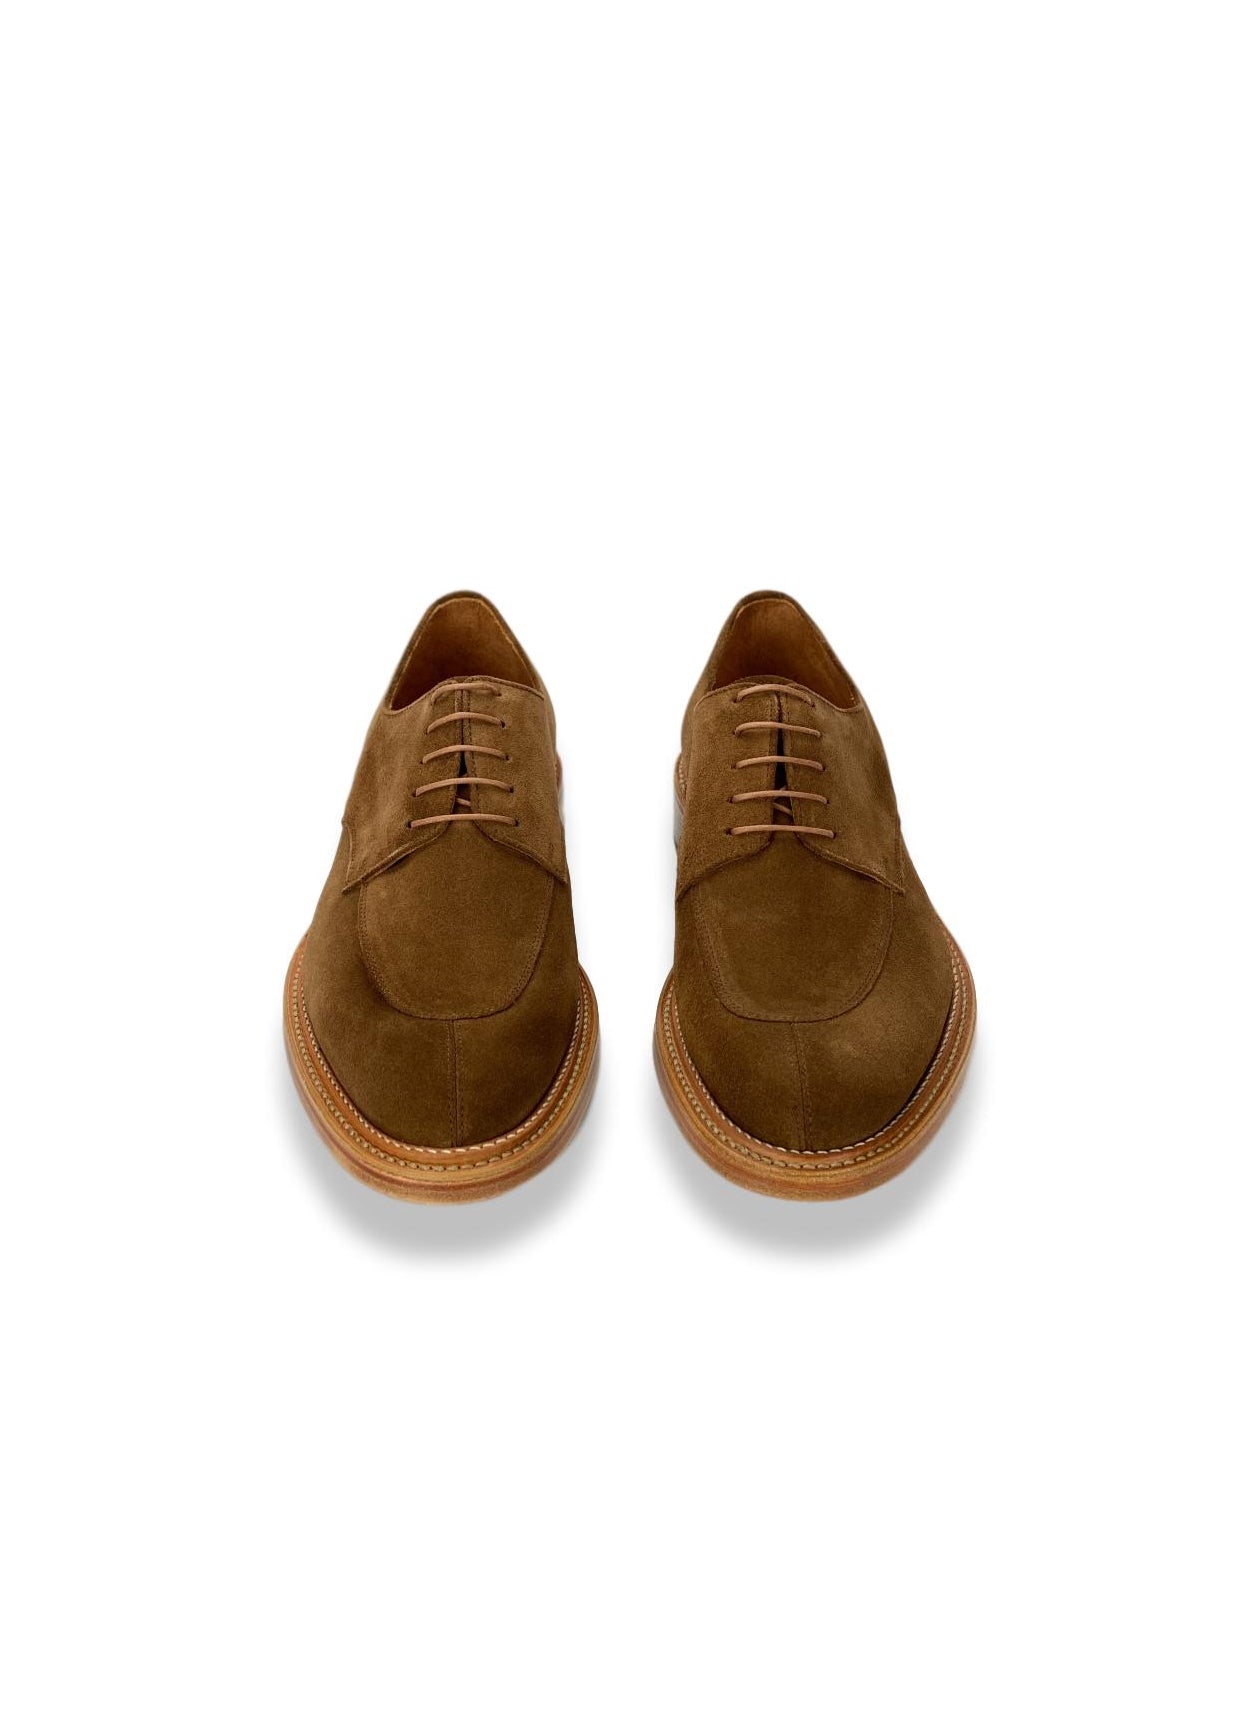 ARMIN OEHLER KNOXVILLE SUEDE LACE UP SHOE - GINGER SUEDE